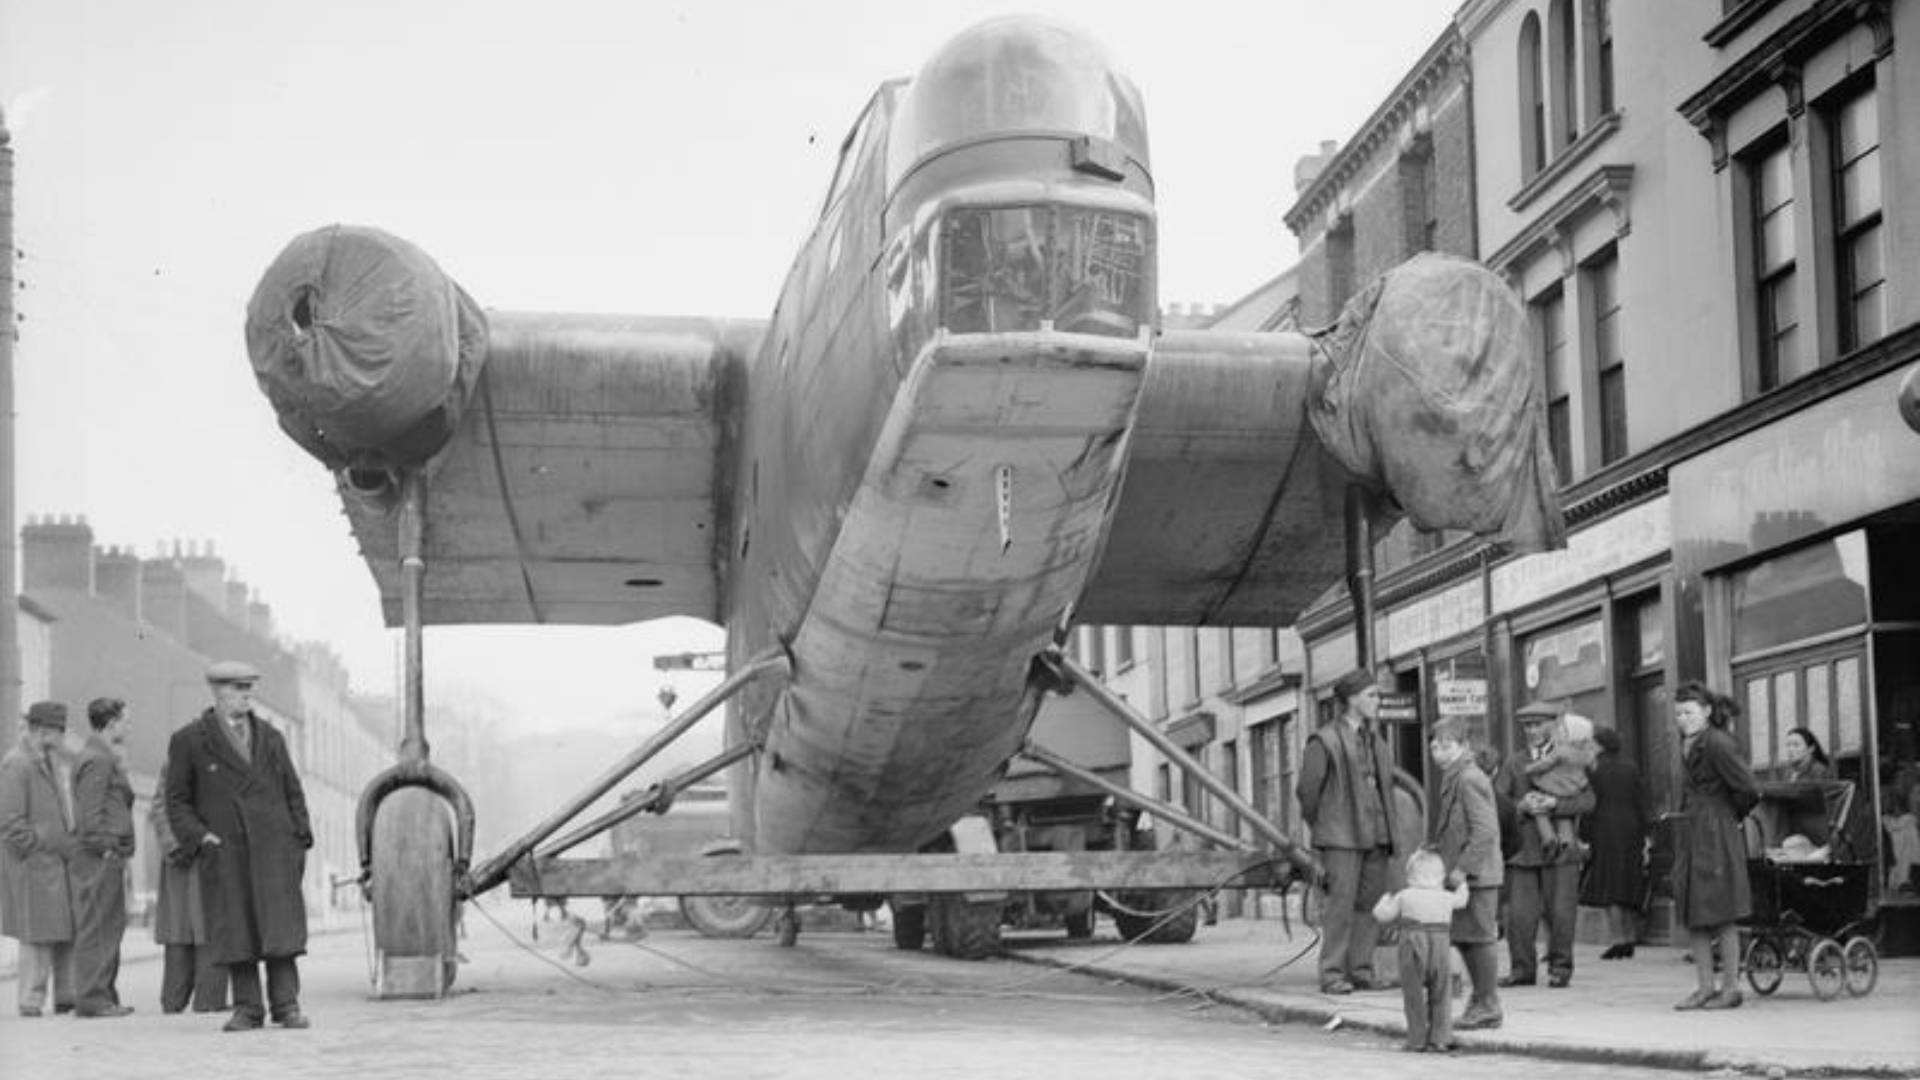 A damaged Bristol Bombay in High Street, Holywood, Co. Down following a forced landing at Clandeboye, Co. Down on 21st March 1942